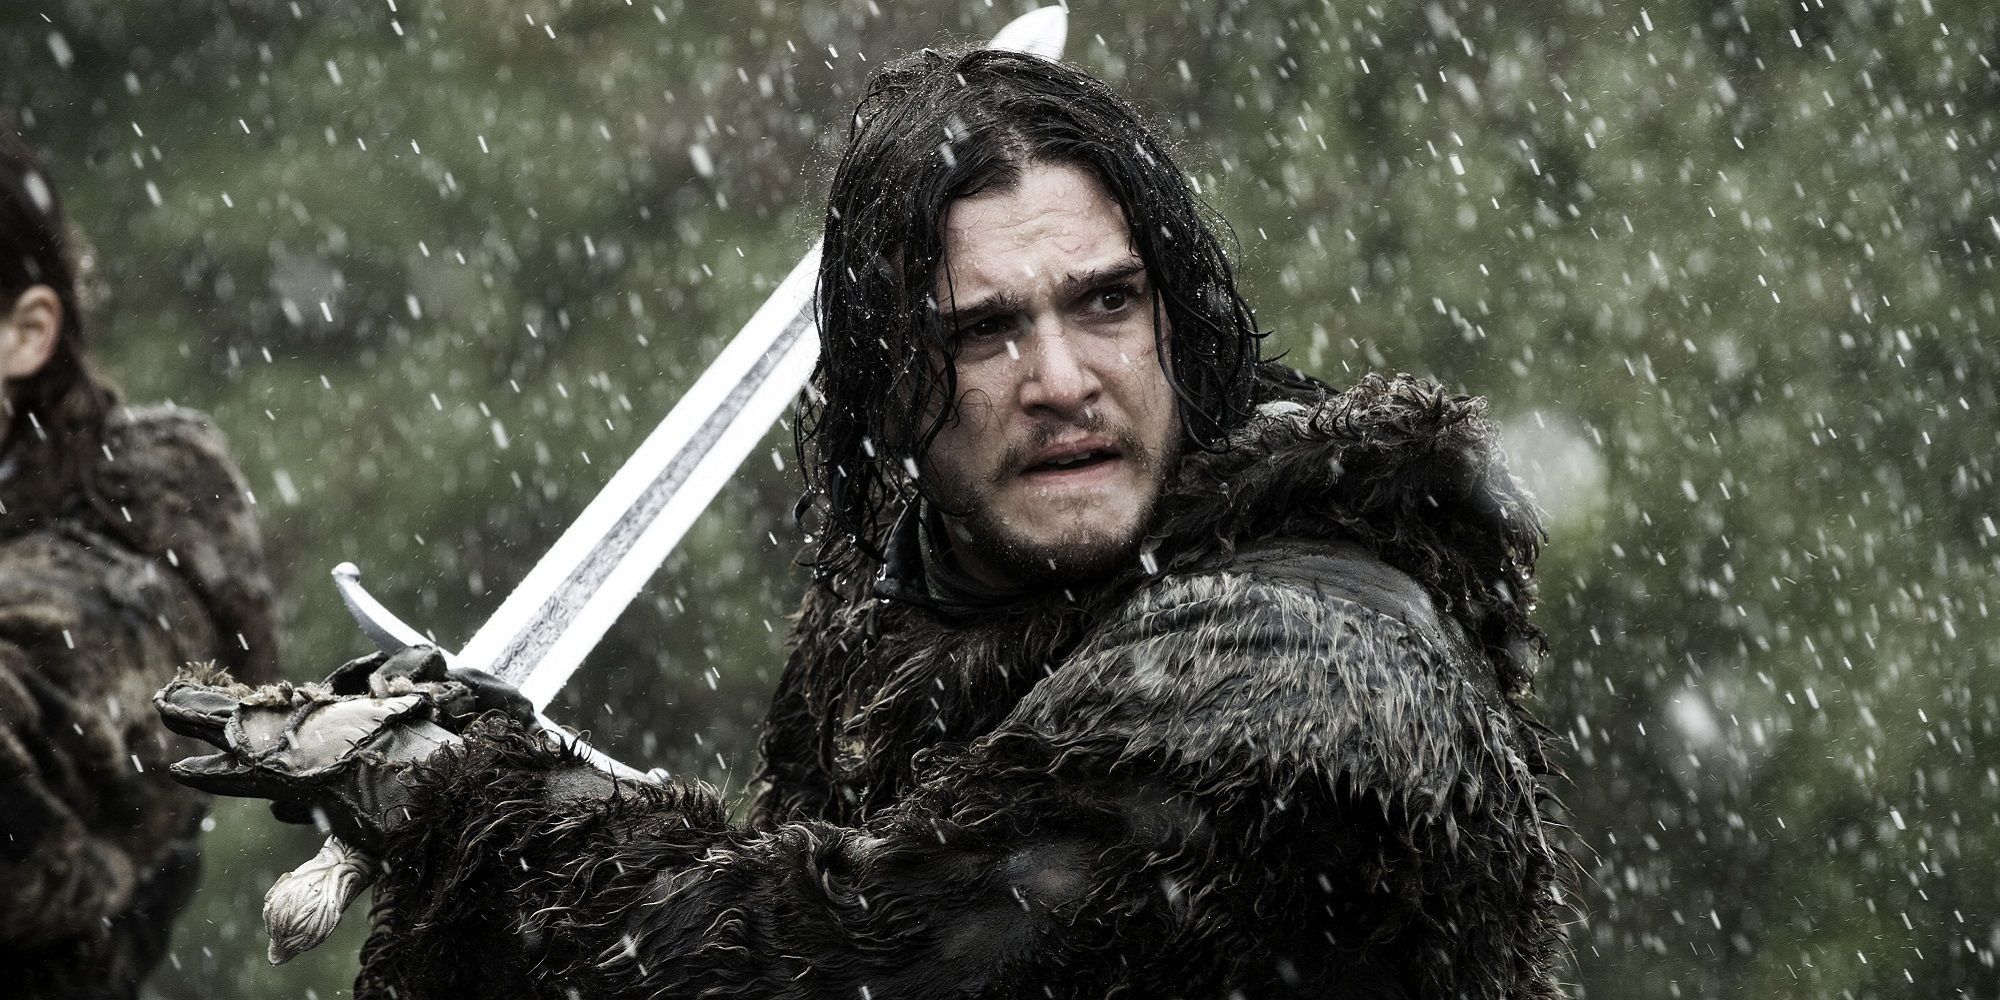 Jon Snow holding Longclaw under the rain in Game of Thrones